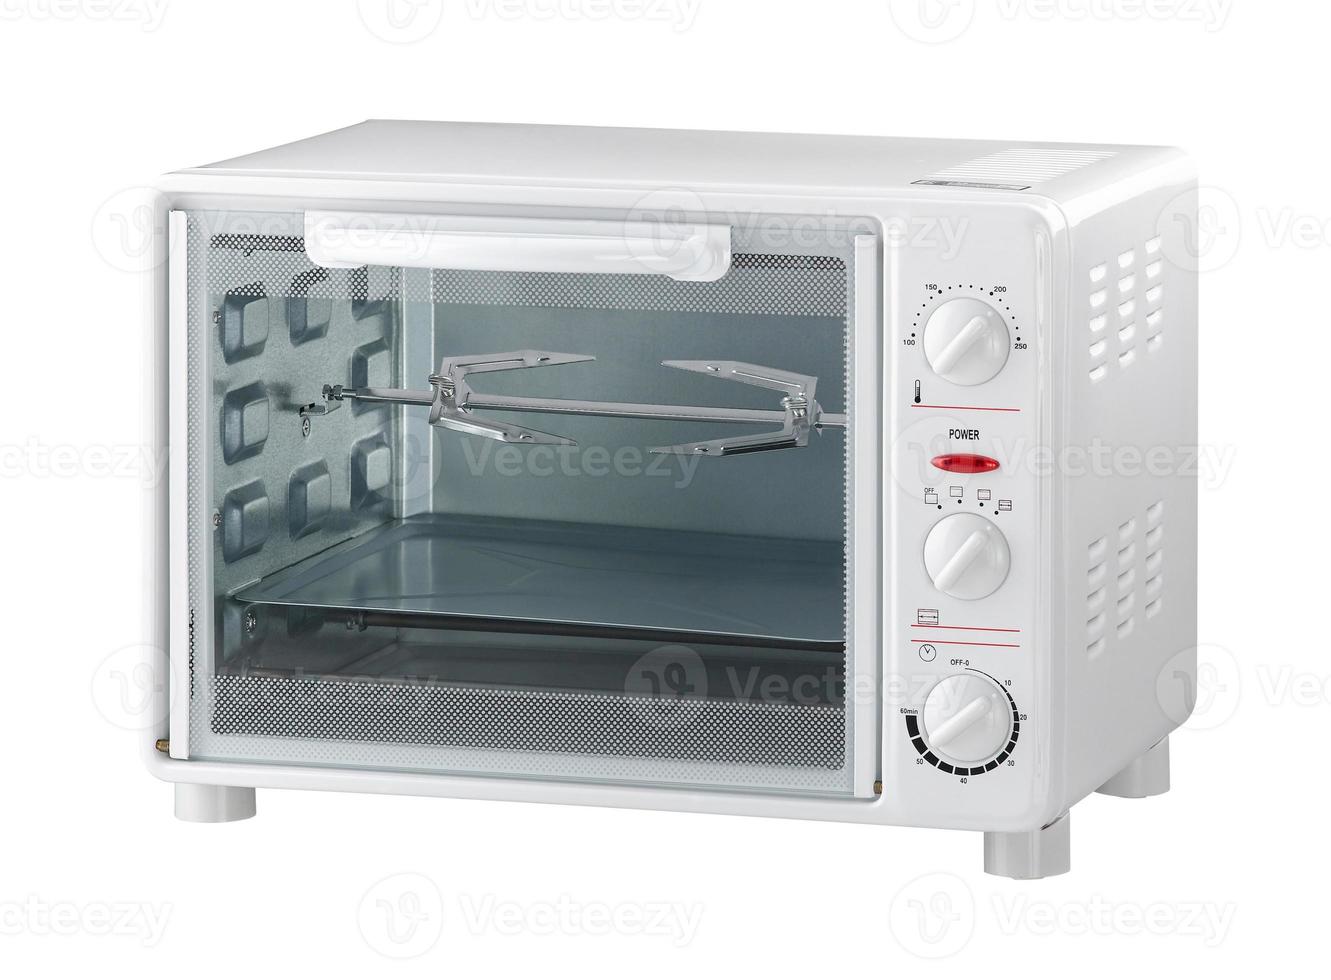 electric oven photo